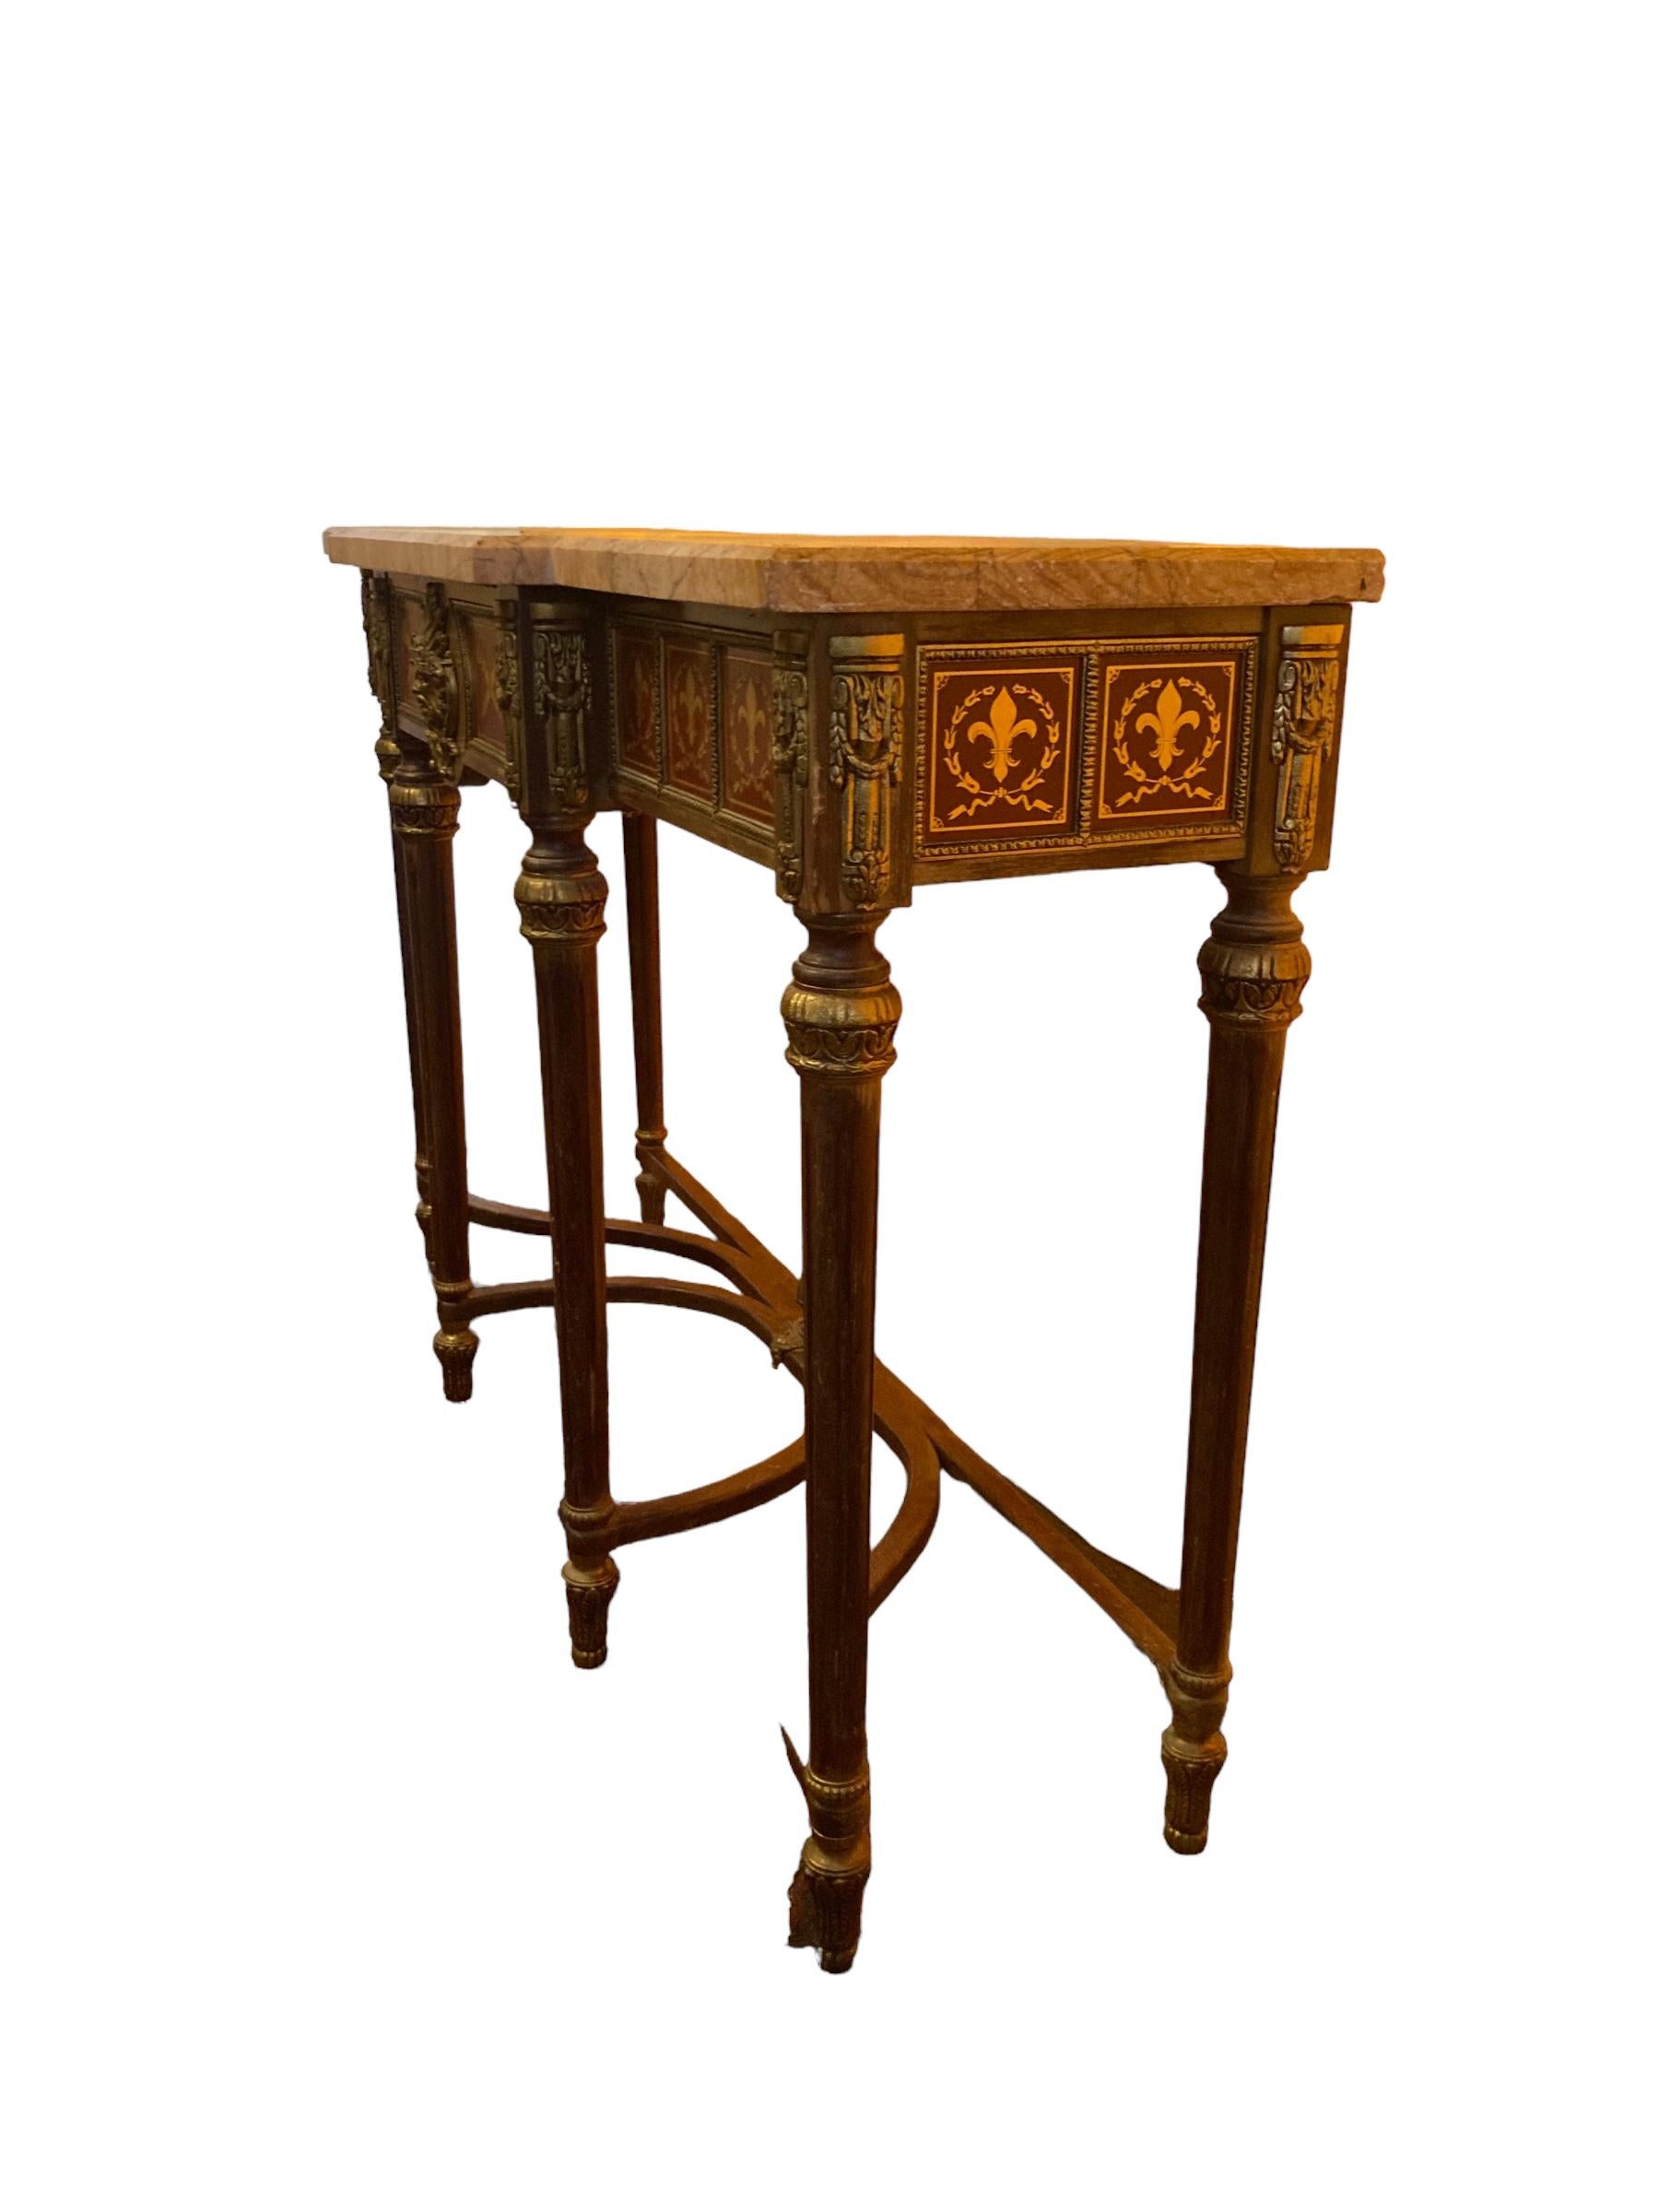 20th Century Louis XVI Revival Style Console Table by H & L Epstein